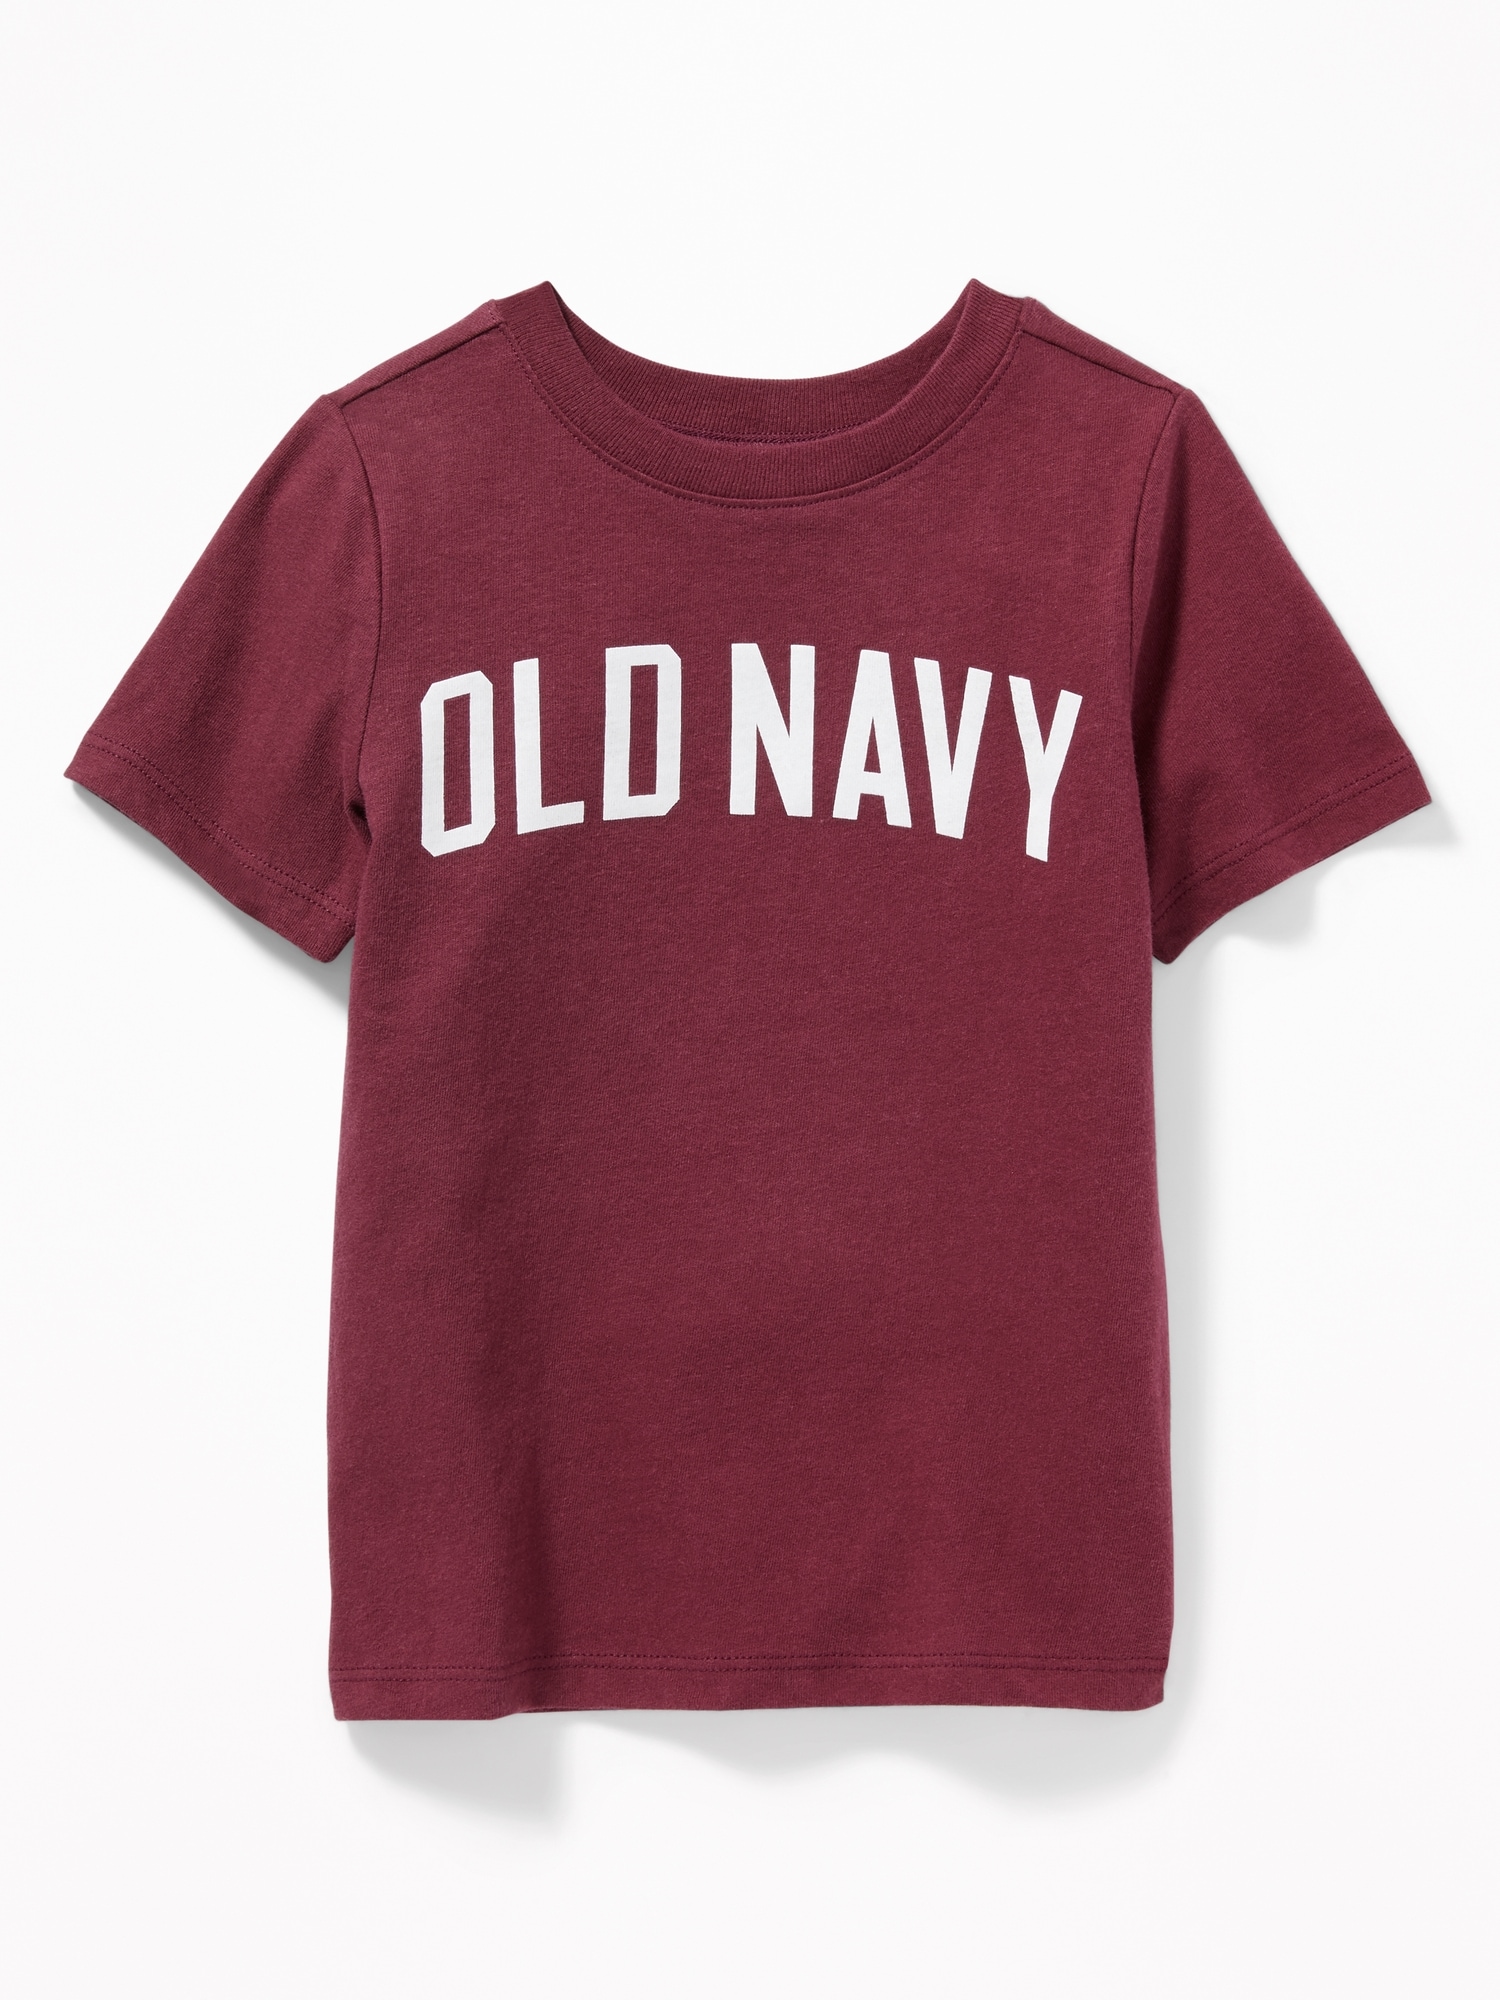 Logo-Graphic Tee for Toddler Boys | Old Navy